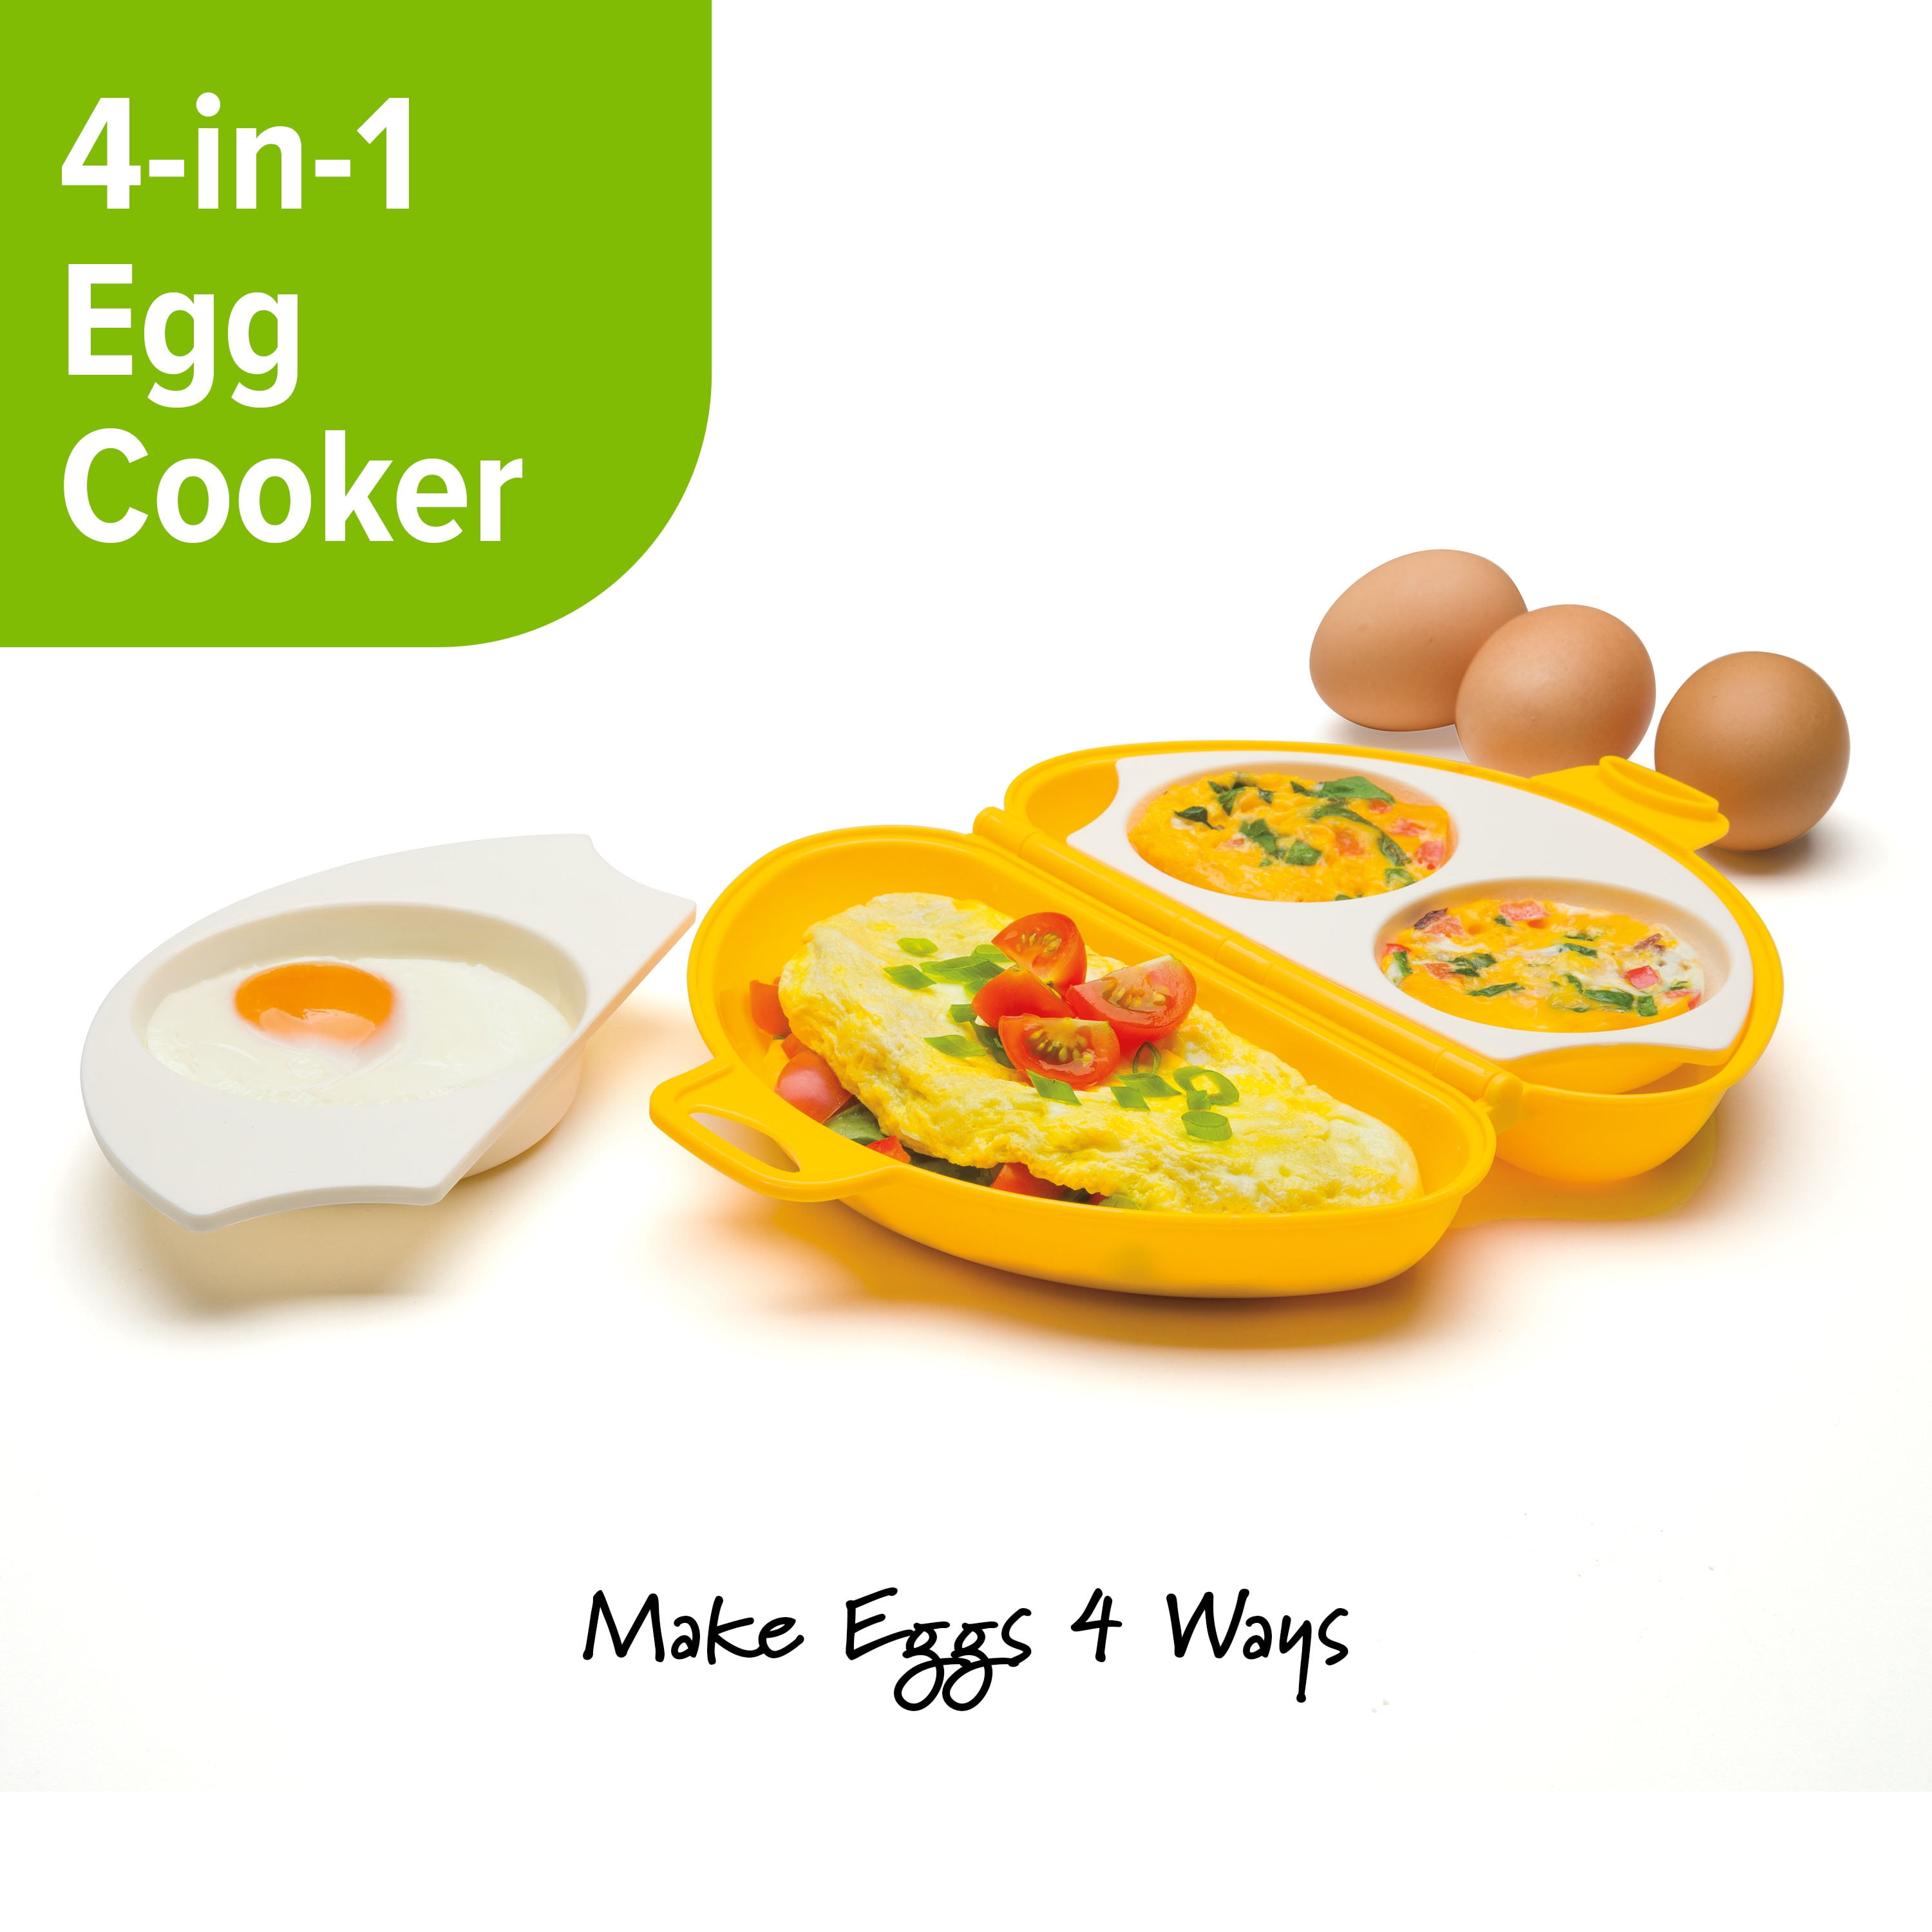 Microwave Egg Cooker - Pick Your Plum